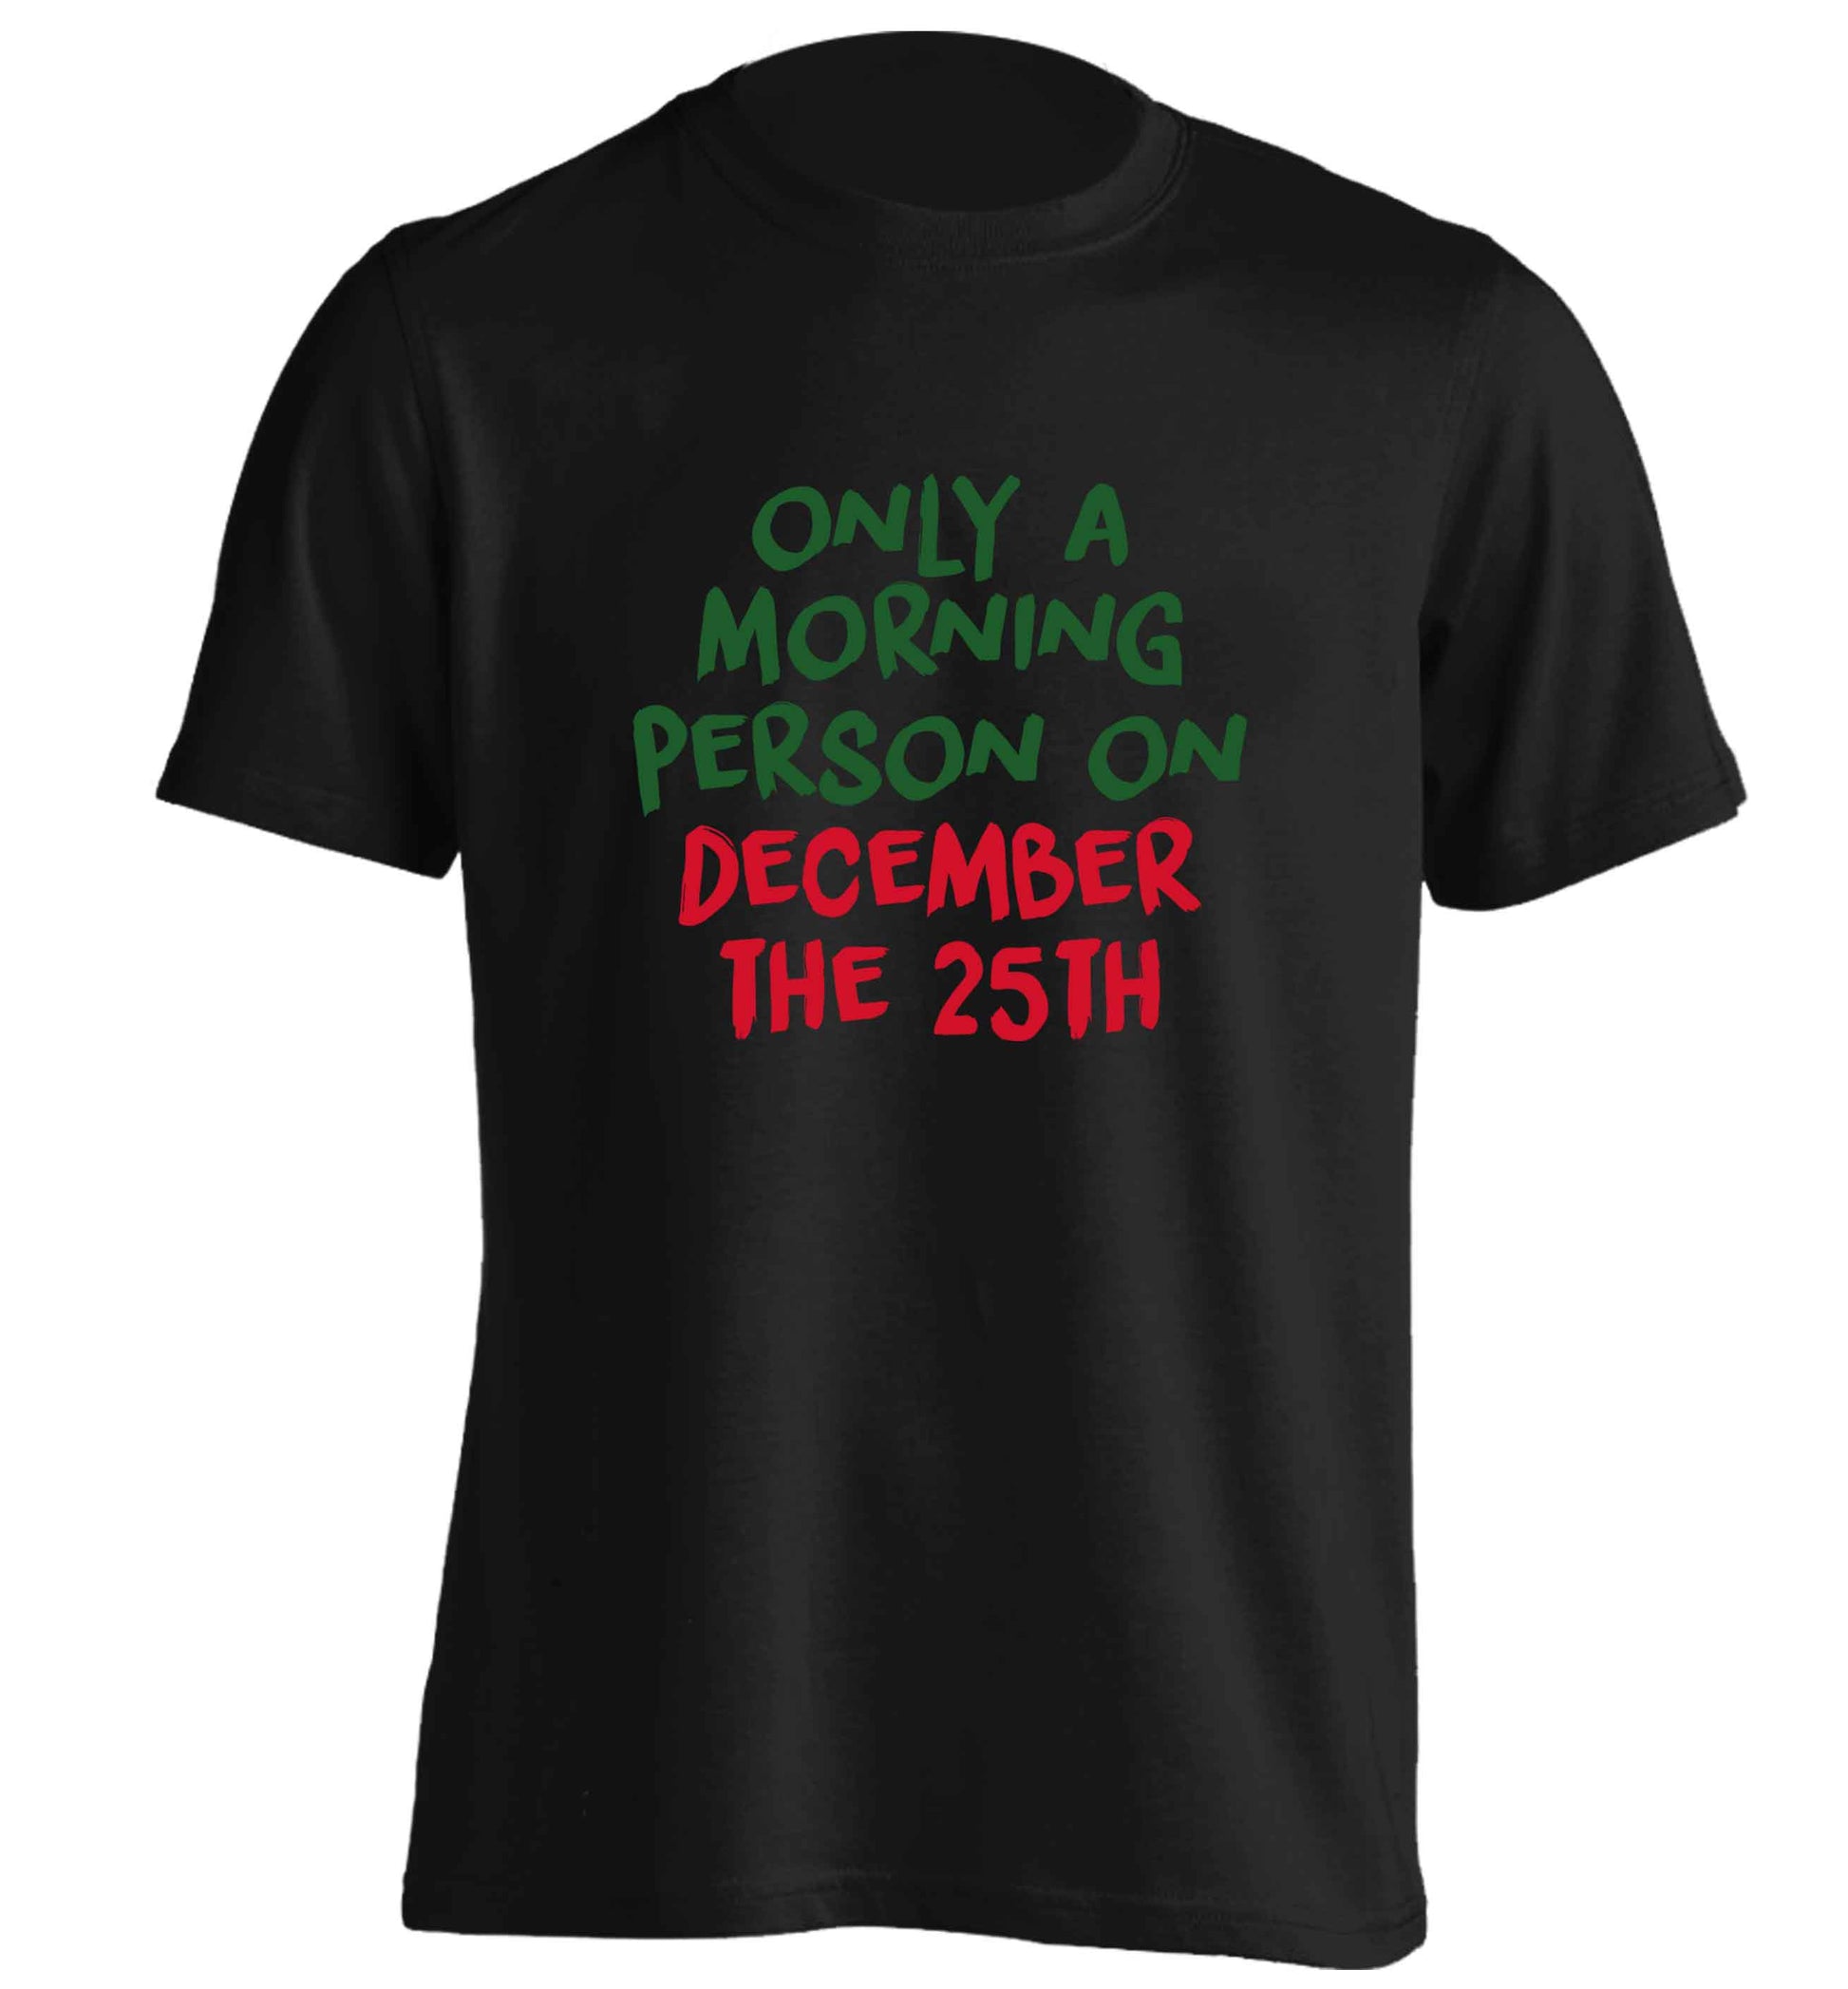 I'm only a morning person on December the 25th adults unisex black Tshirt 2XL